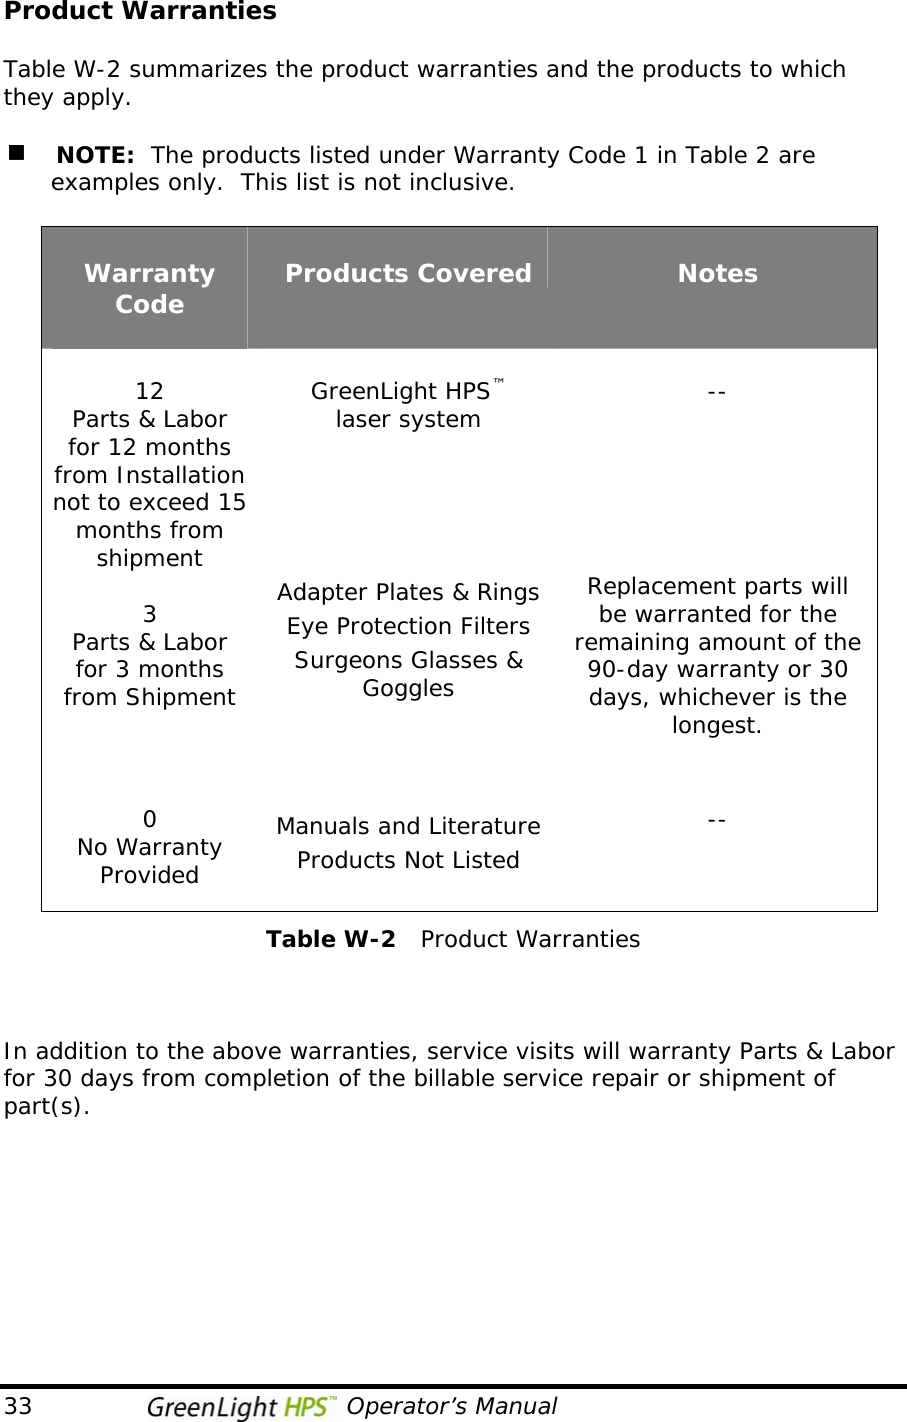  Product Warranties  Table W-2 summarizes the product warranties and the products to which they apply.   NOTE:  The products listed under Warranty Code 1 in Table 2 are        examples only.  This list is not inclusive.       Warranty  Products Covered  Notes Code   GreenLight HPS™       laser system      --  12 Parts &amp; Labor for 12 months from Installation not to exceed 15 months from shipment      Replacement parts will be warranted for the remaining amount of the 90-day warranty or 30 days, whichever is the longest. Adapter Plates &amp; Rings 3  Eye Protection Filters Parts &amp; Labor for 3 months from Shipment  Surgeons Glasses &amp; Goggles       0  -- Manuals and Literature No Warranty Provided  Products Not Listed  Table W-2   Product Warranties    In addition to the above warranties, service visits will warranty Parts &amp; Labor for 30 days from completion of the billable service repair or shipment of part(s). 33                                       Operator’s Manual                                          